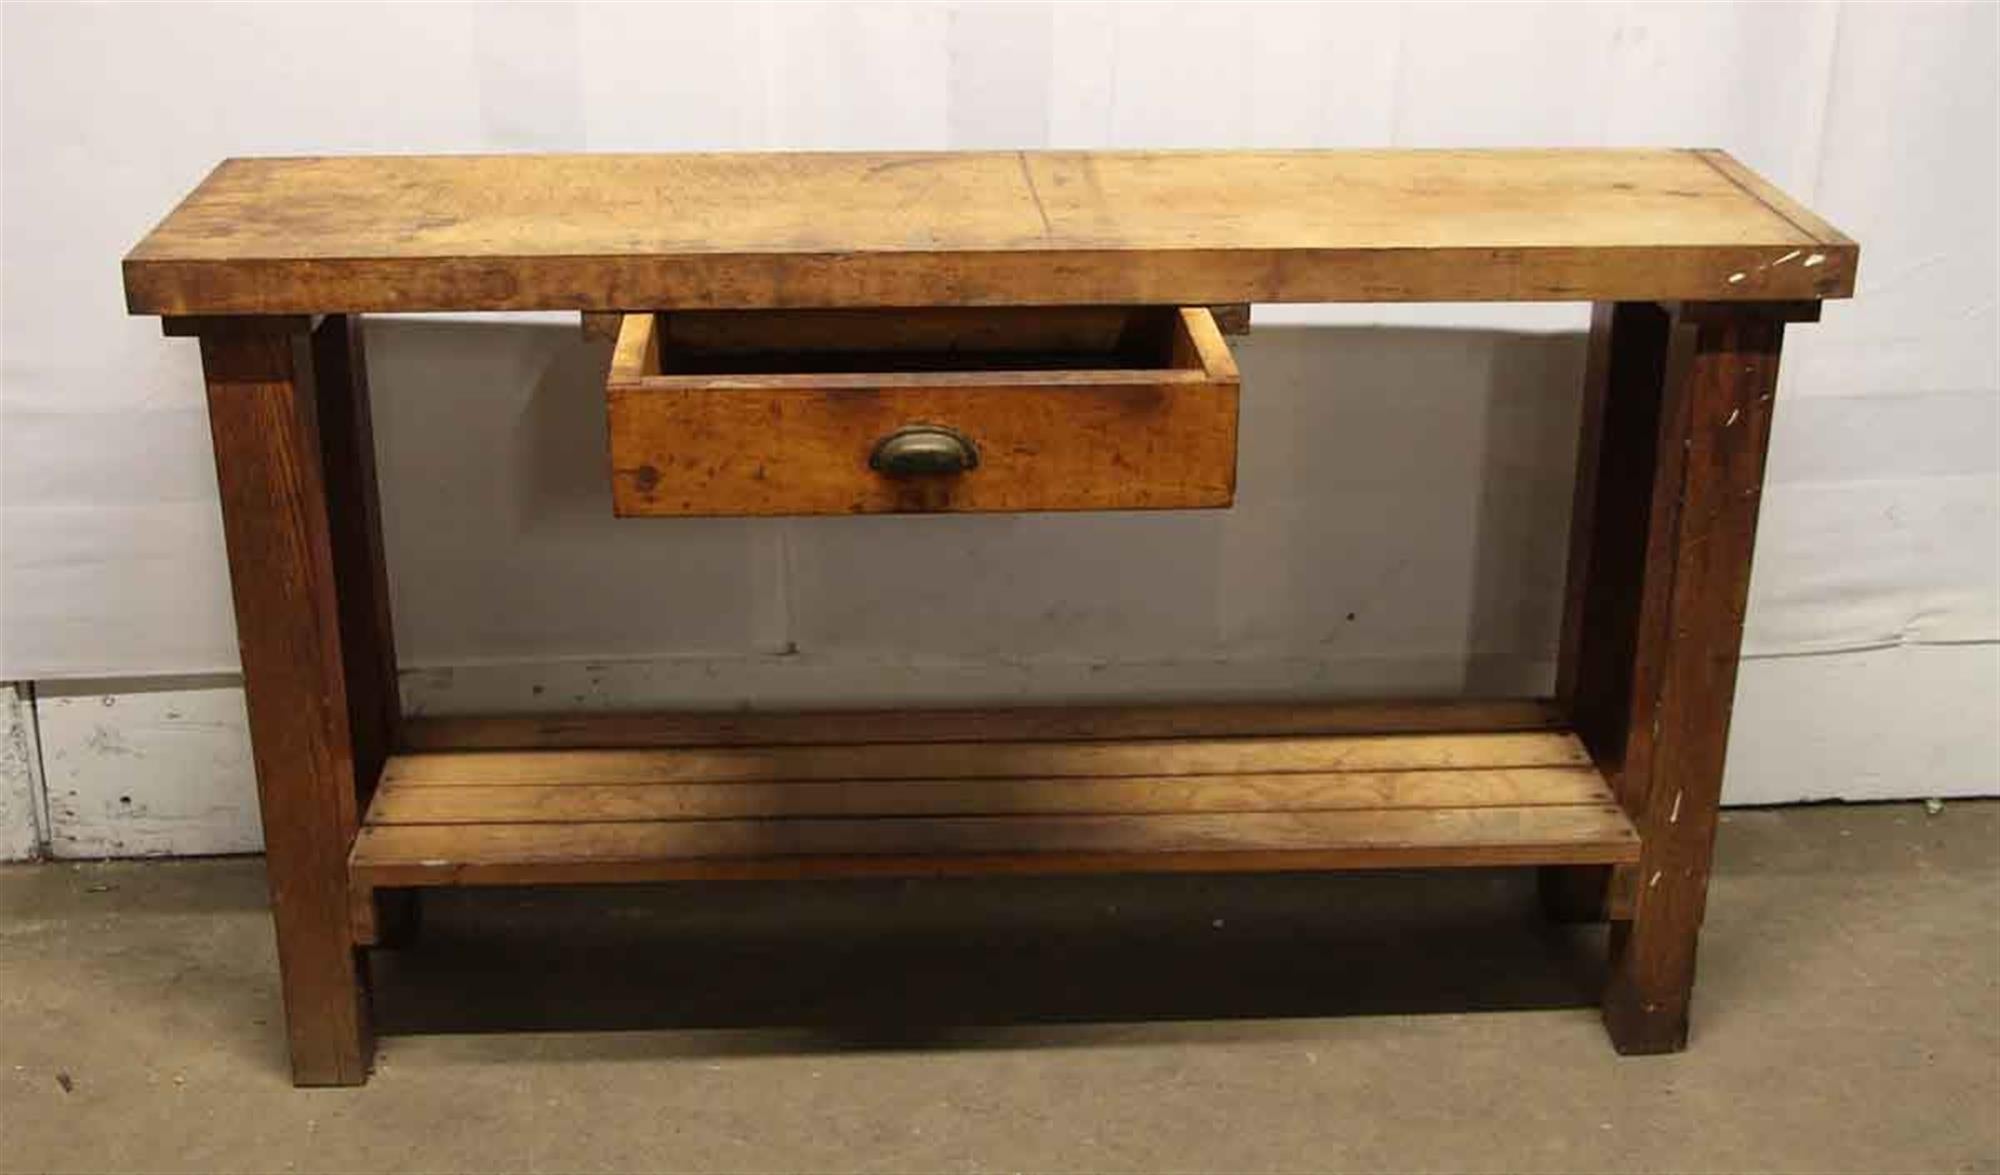 Mid-20th Century 1950s Original Distressed Wood Work Bench with Drawer and Lower Shelf